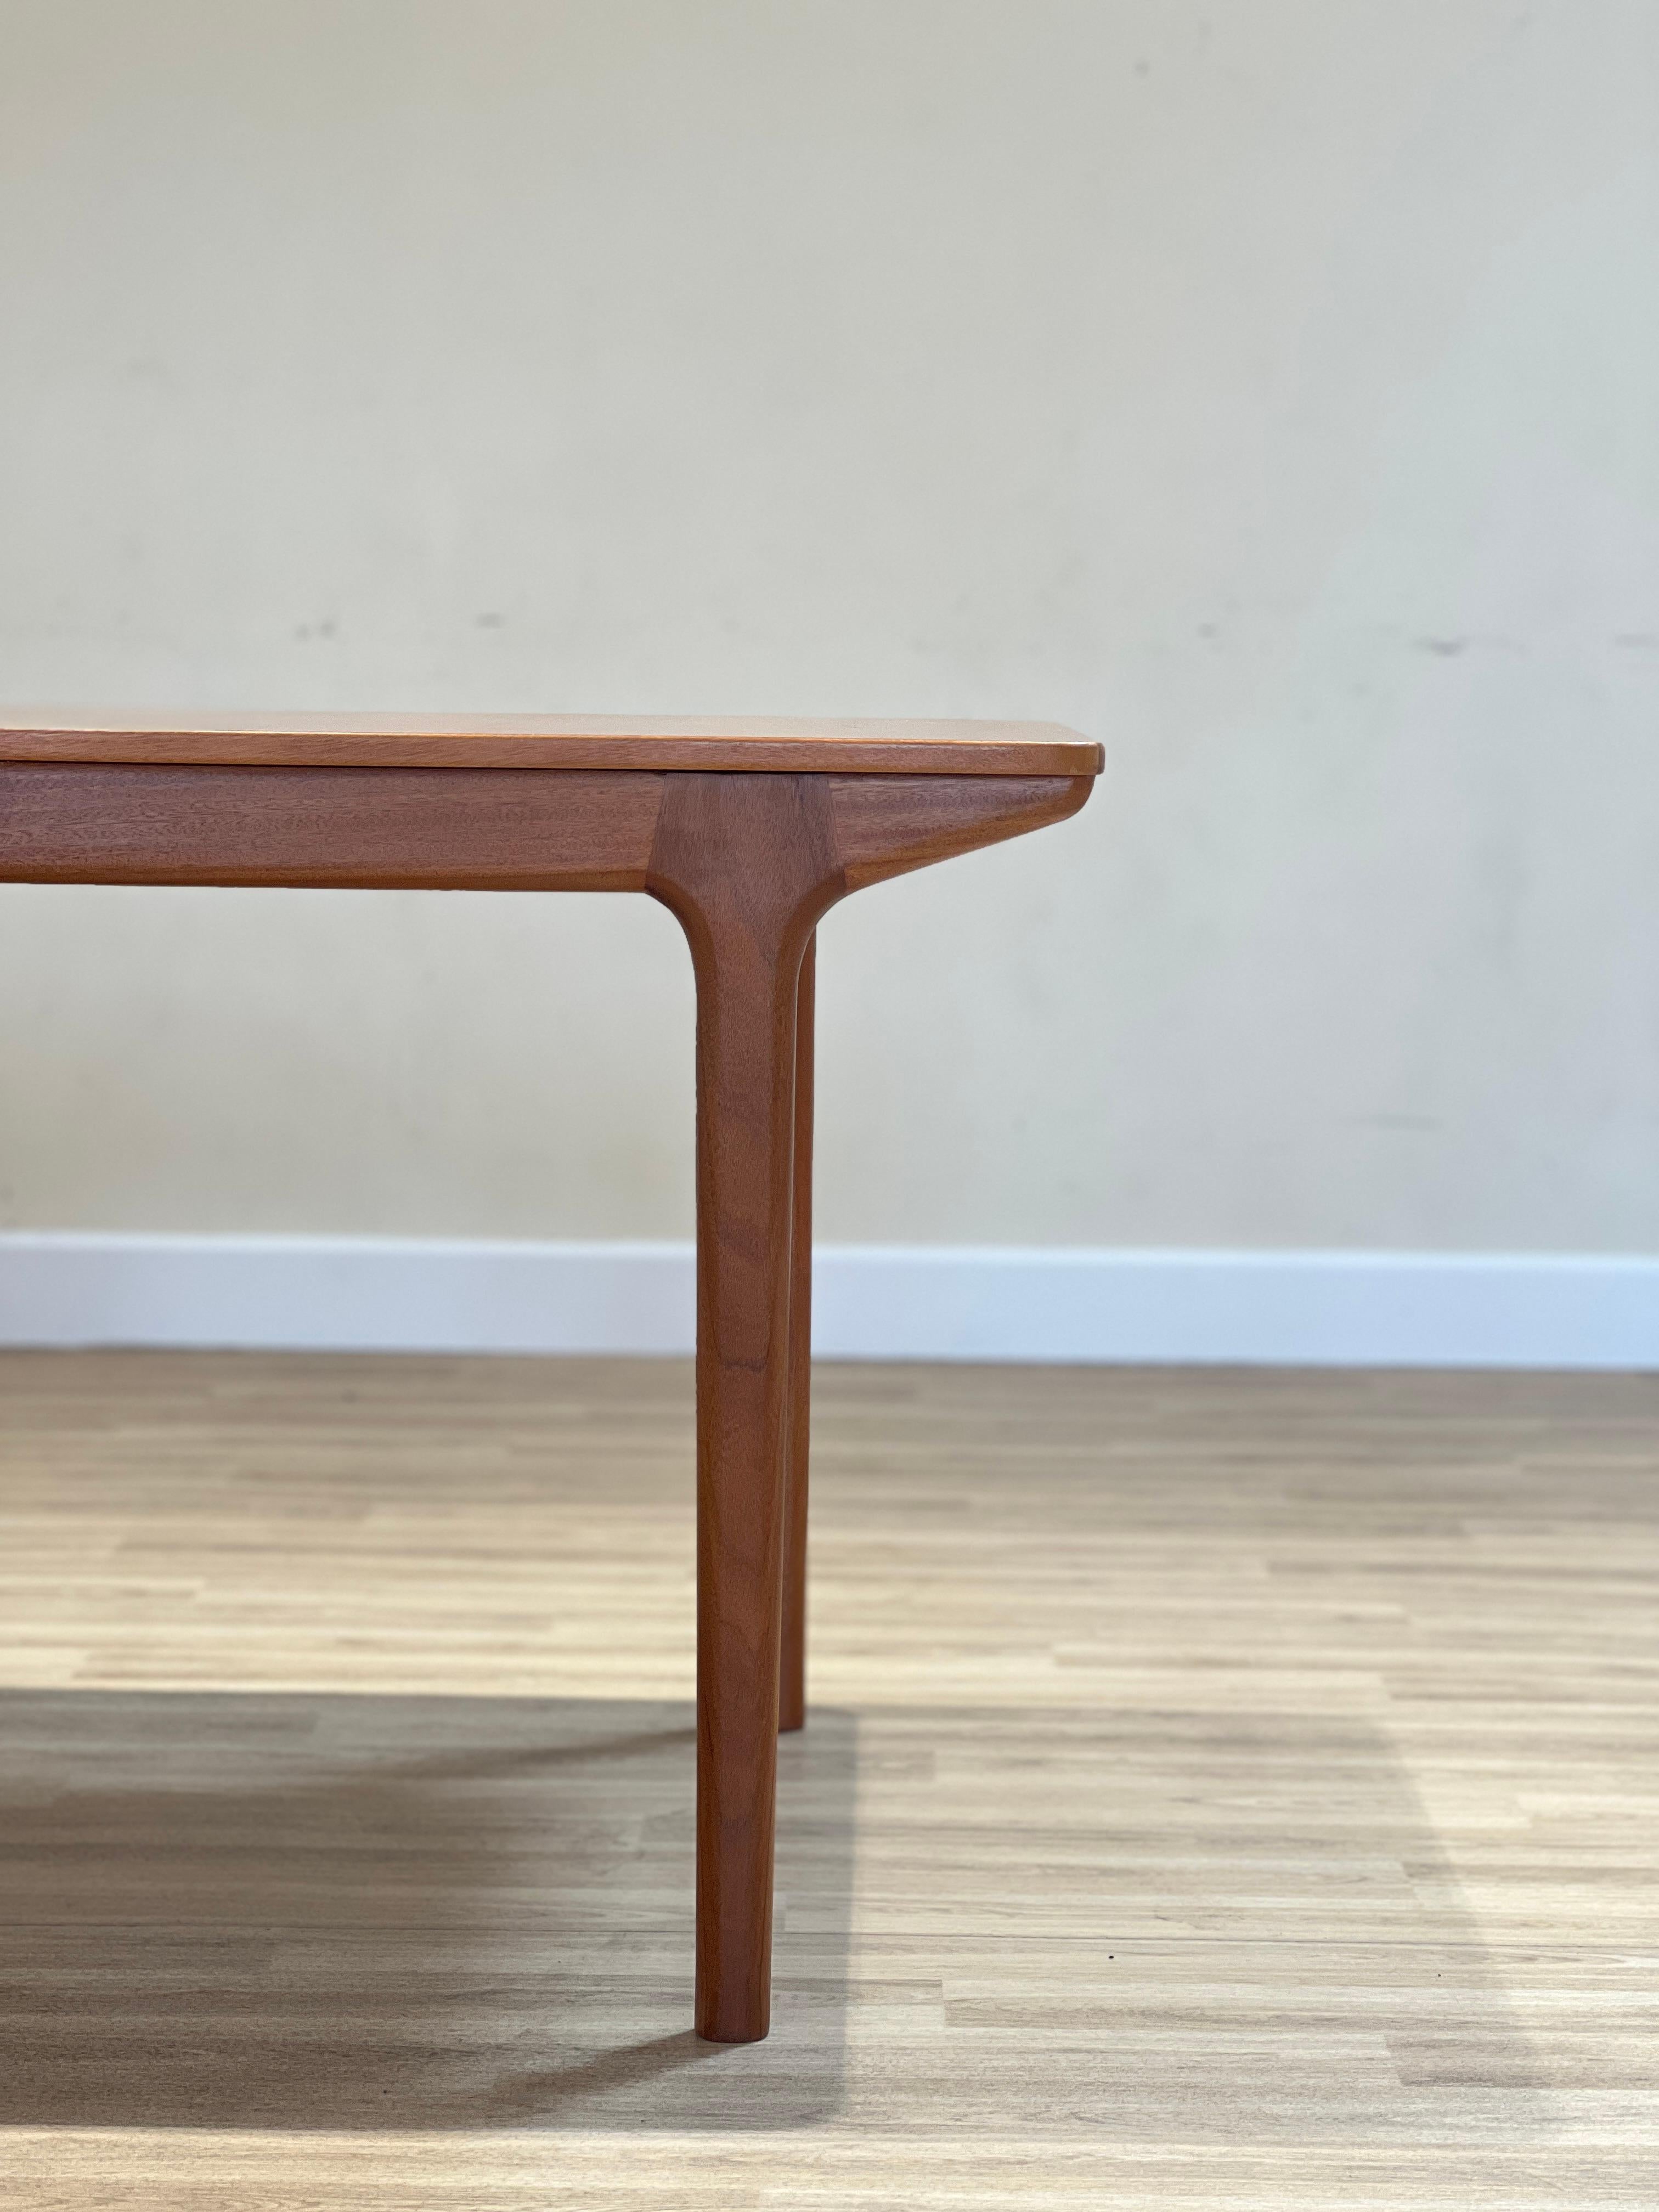 Extending dining table designed by Tom Robertson for McIntosh’s Dunvegan collection in the 70s. This piece, made of teak, keeps the original signature with the year.

This table became one of the icons of the brand, its design was patented by